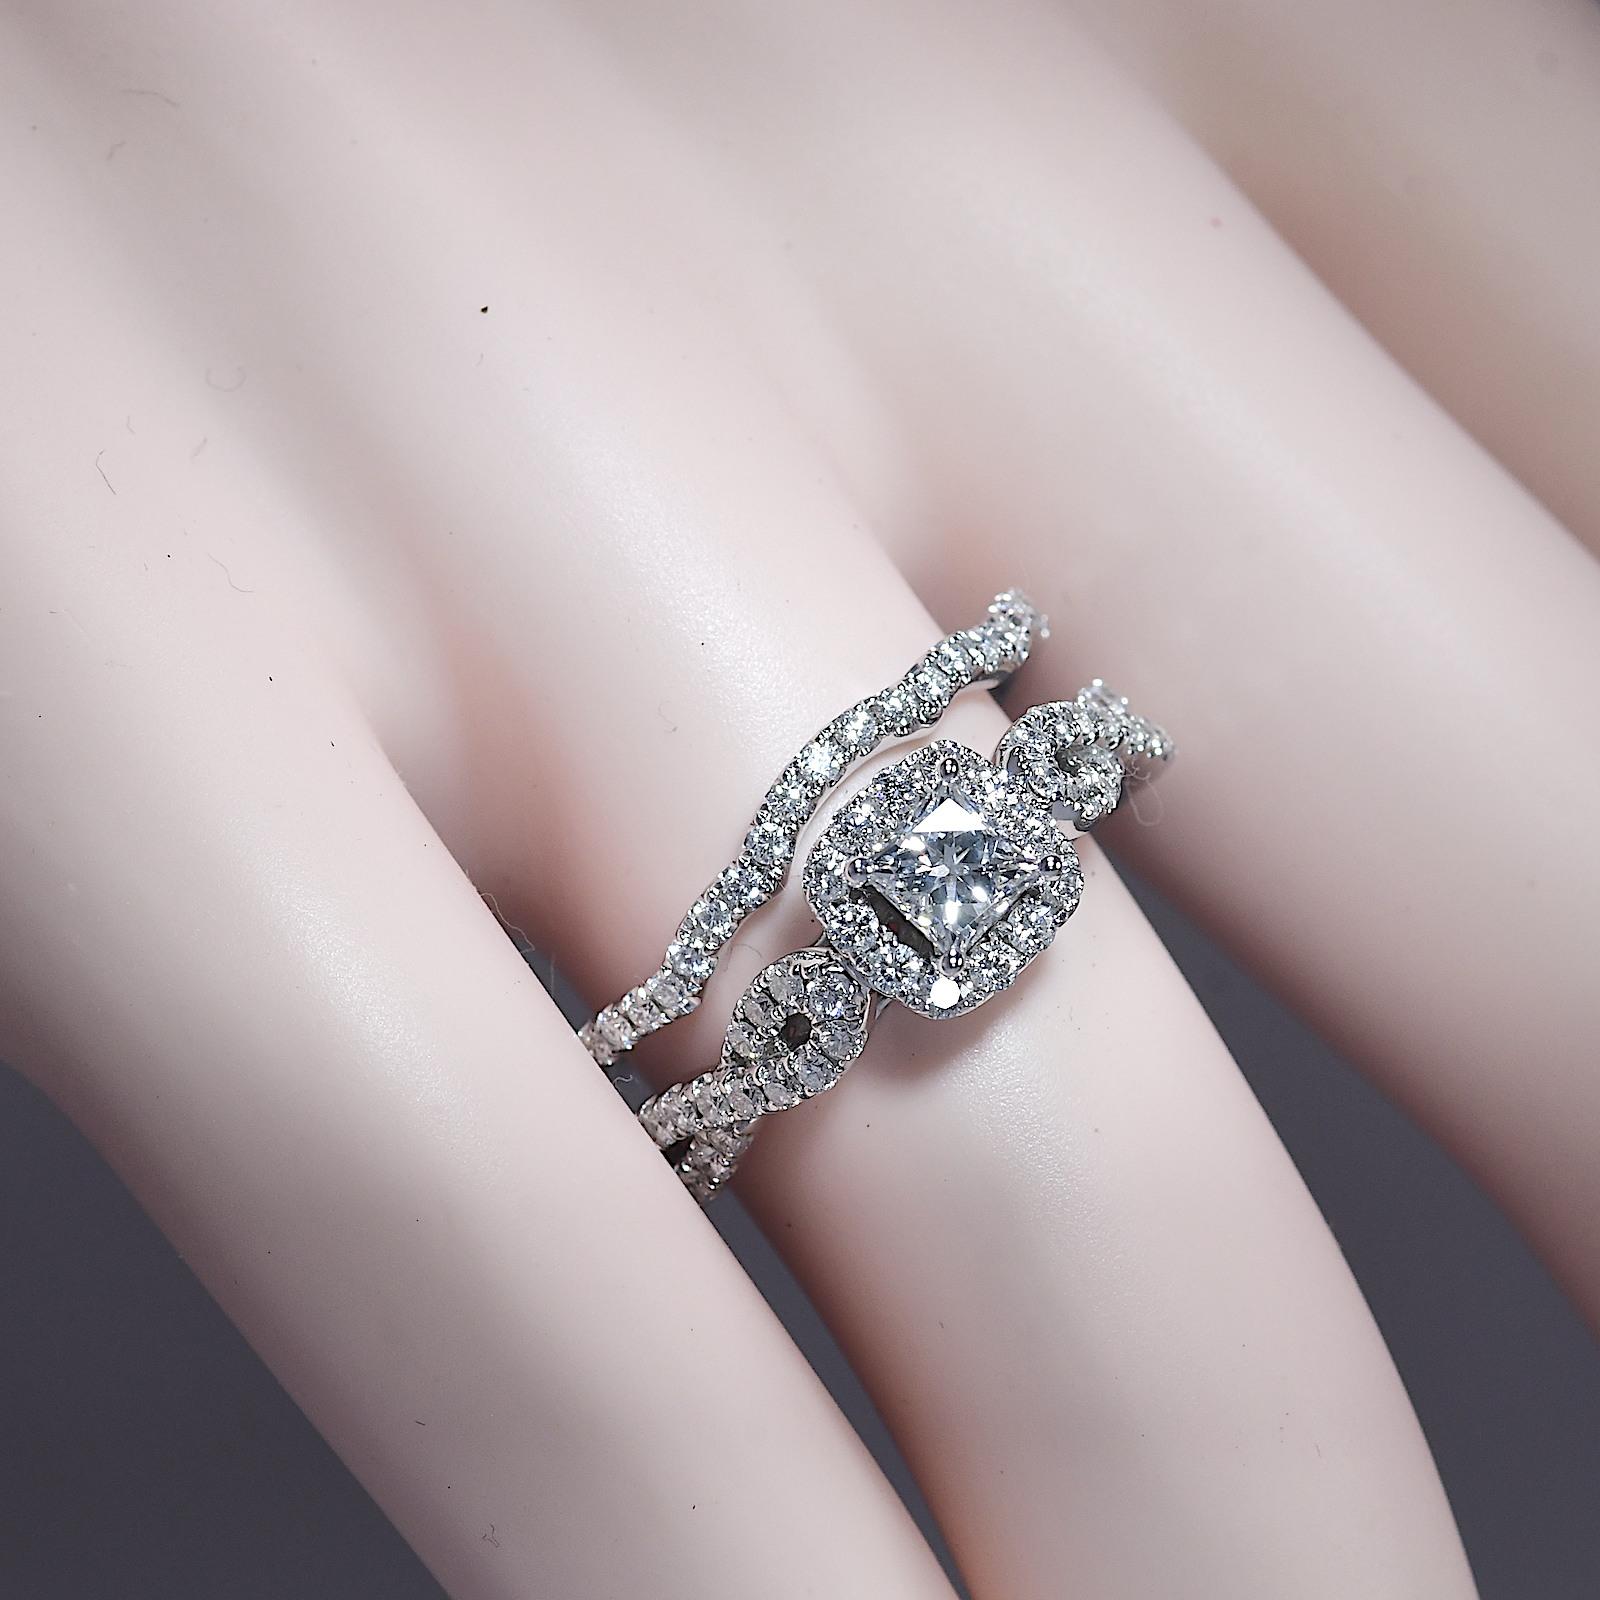 A scintillating .45 carat princess-cut Leo Diamond is the focal point of this elegant engagement ring for her. Shimmering round diamonds frame the center and flow along the 14K white gold band and the matching wedding band, bringing the total